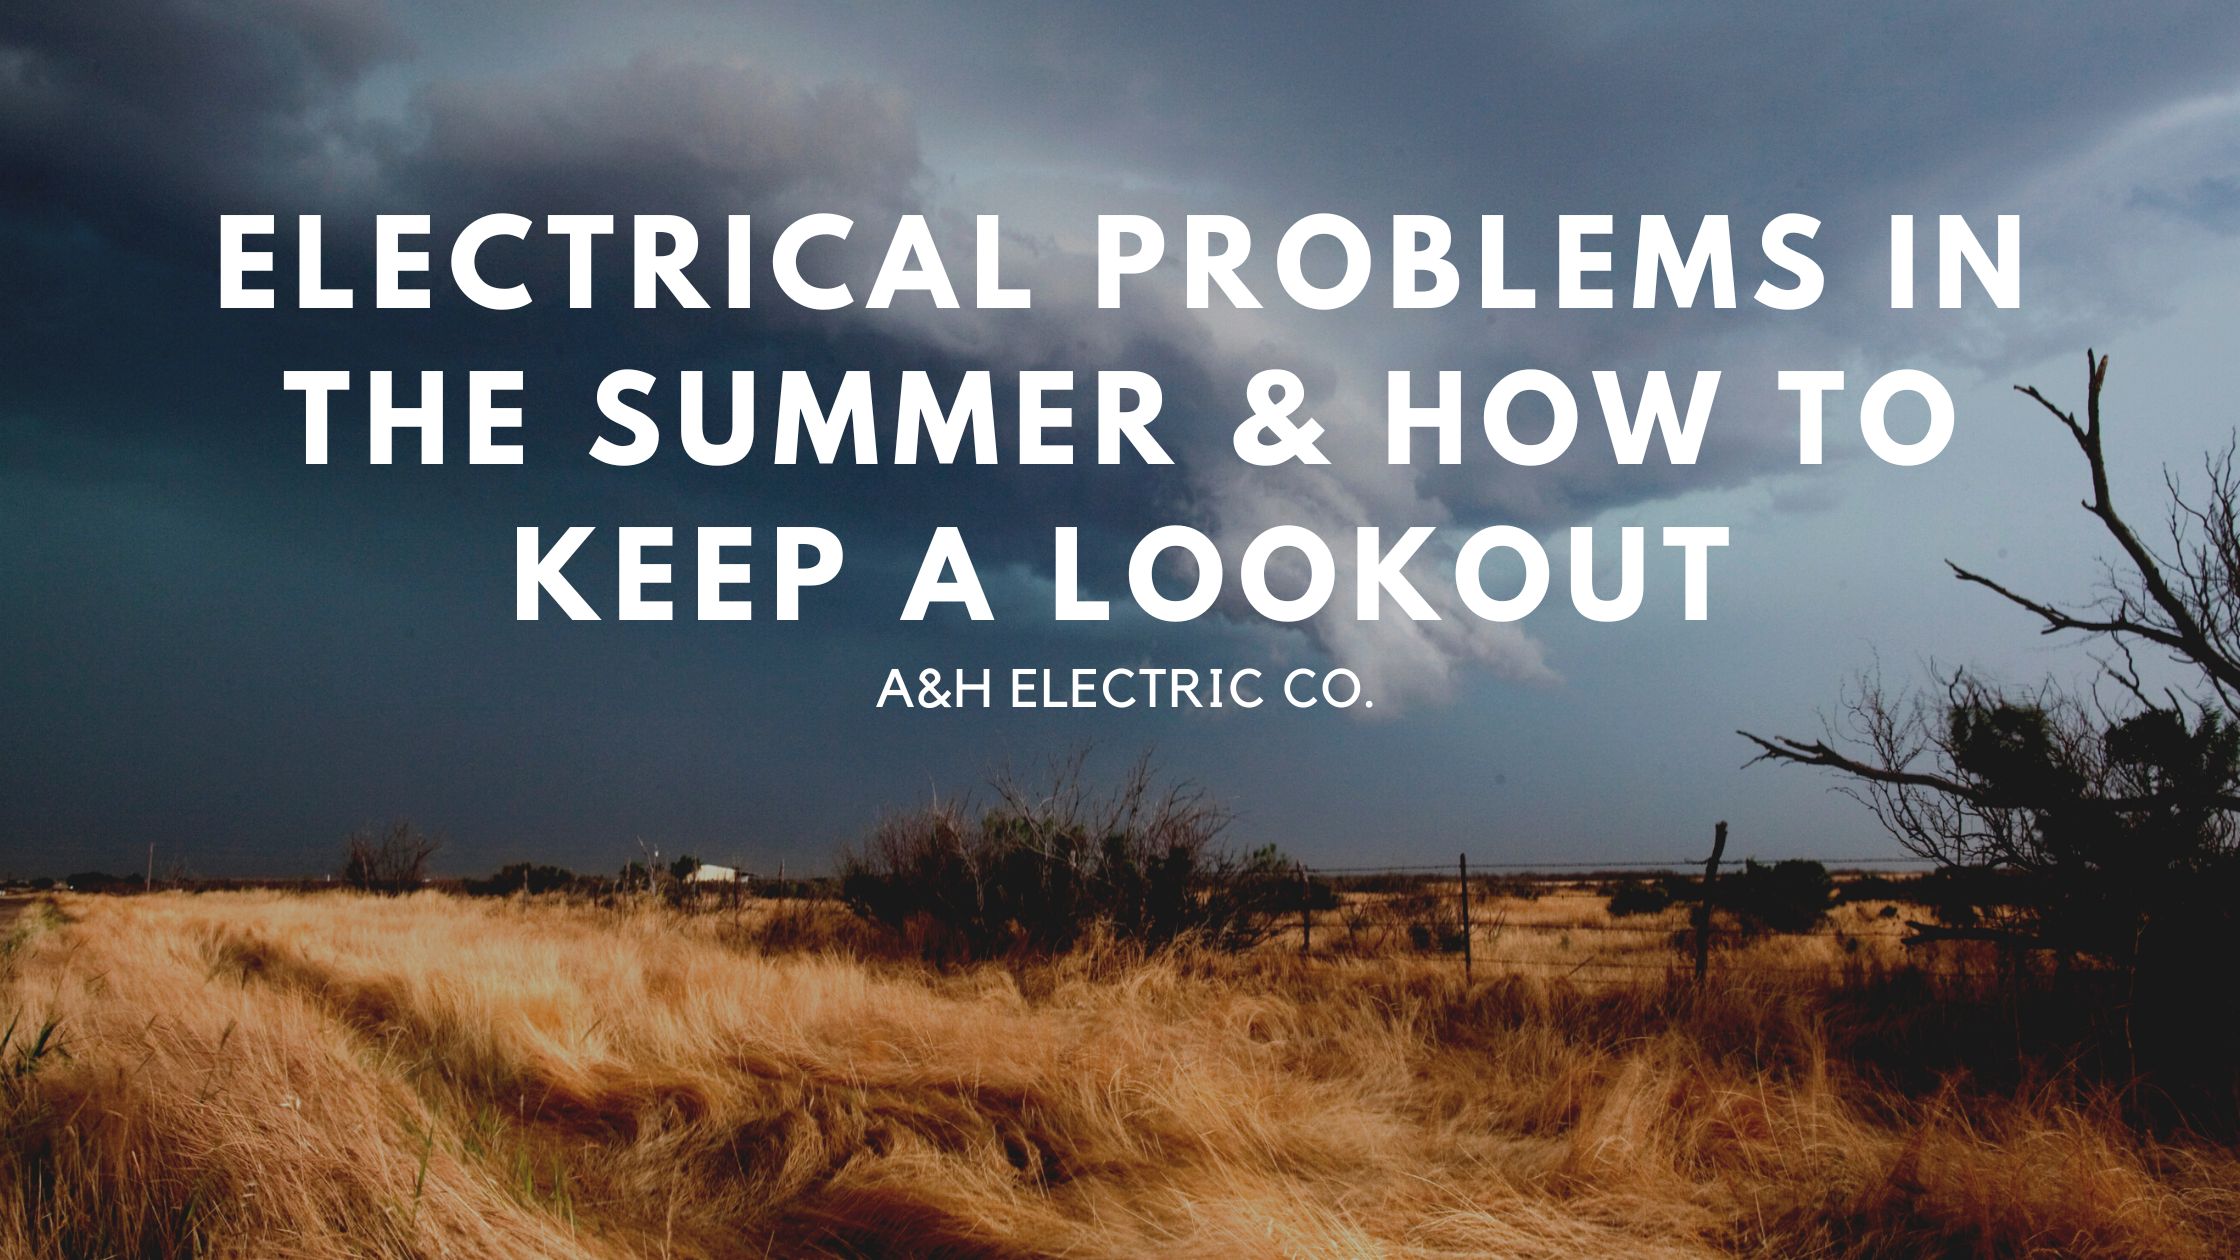 Electrical Problems in the Summer & How to Keep a Lookout